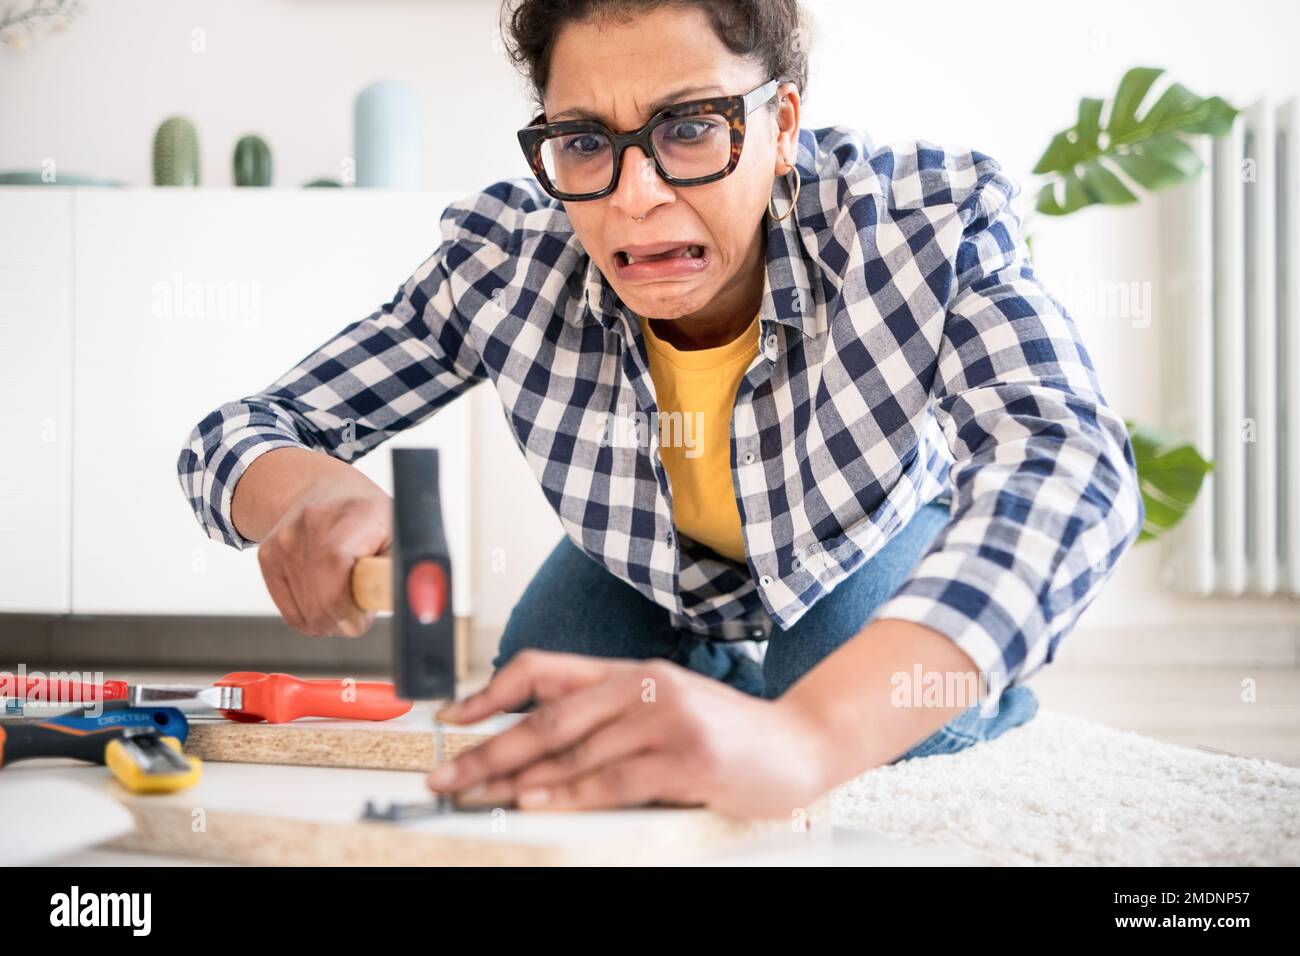 Injured black woman during home renovation work, focus on face Stock Photo